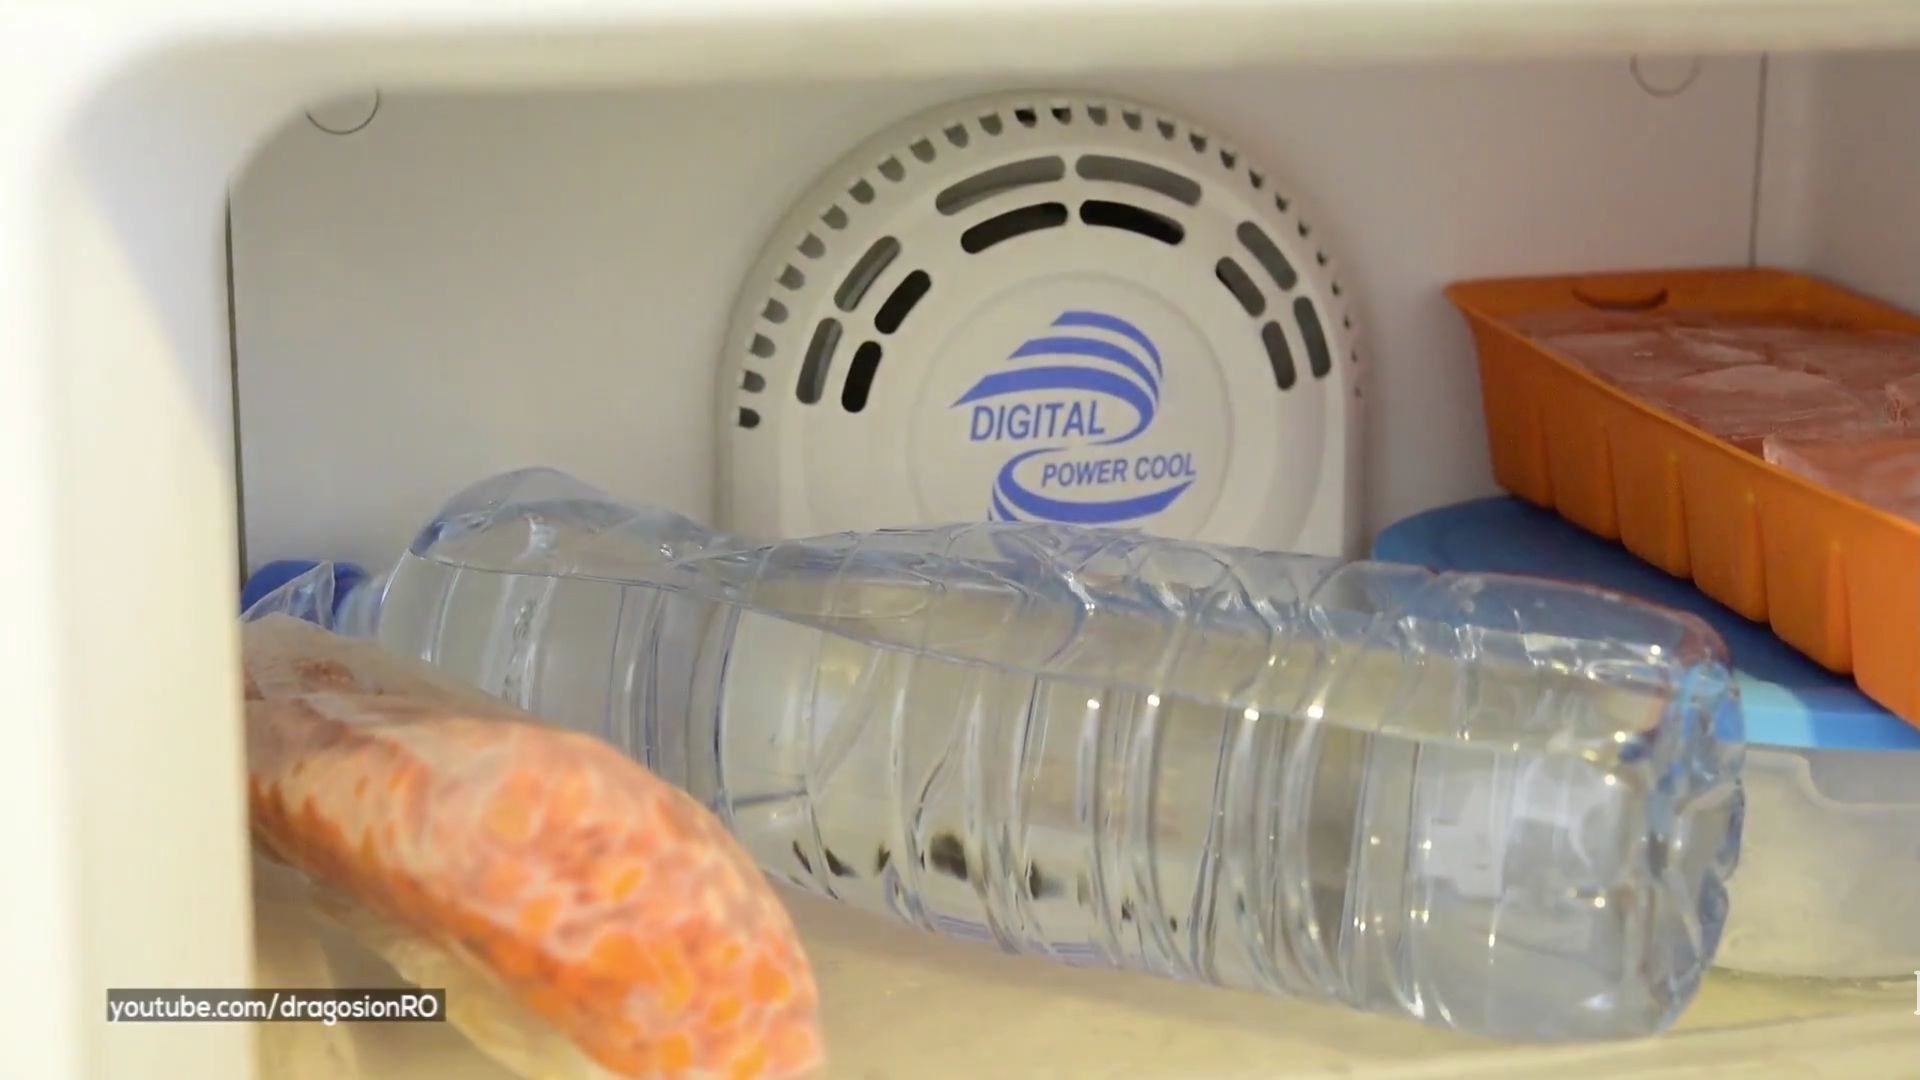 Place water bottle in the freezer overnight